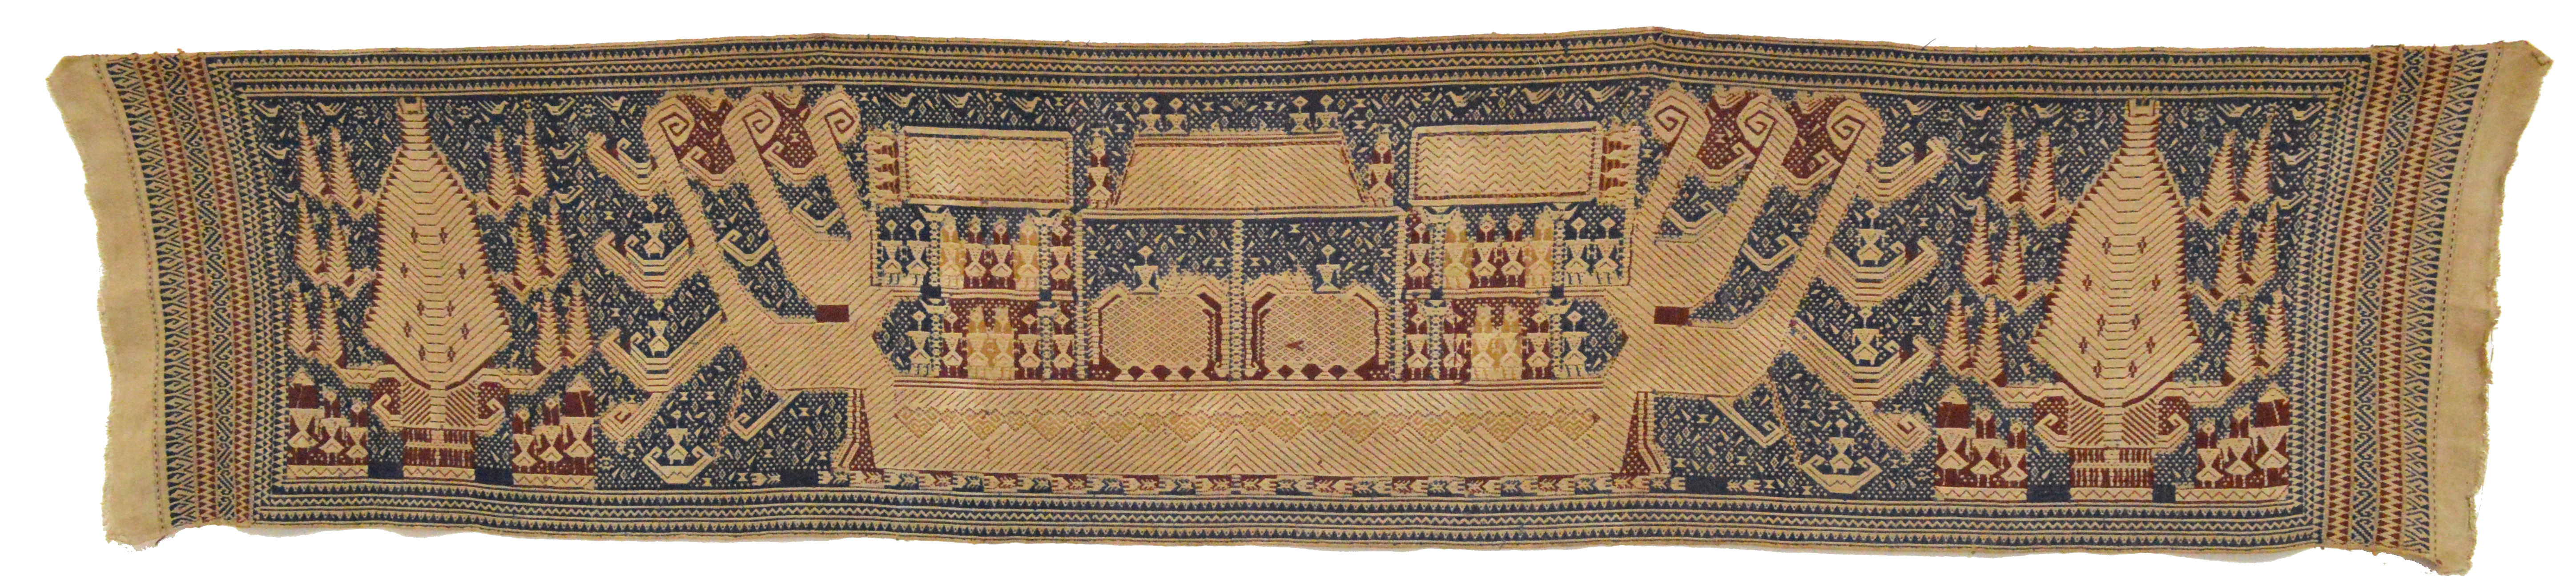 A Lampung ceremonial embroidered ship cloth Indonesia the tiered ship with two elephants and